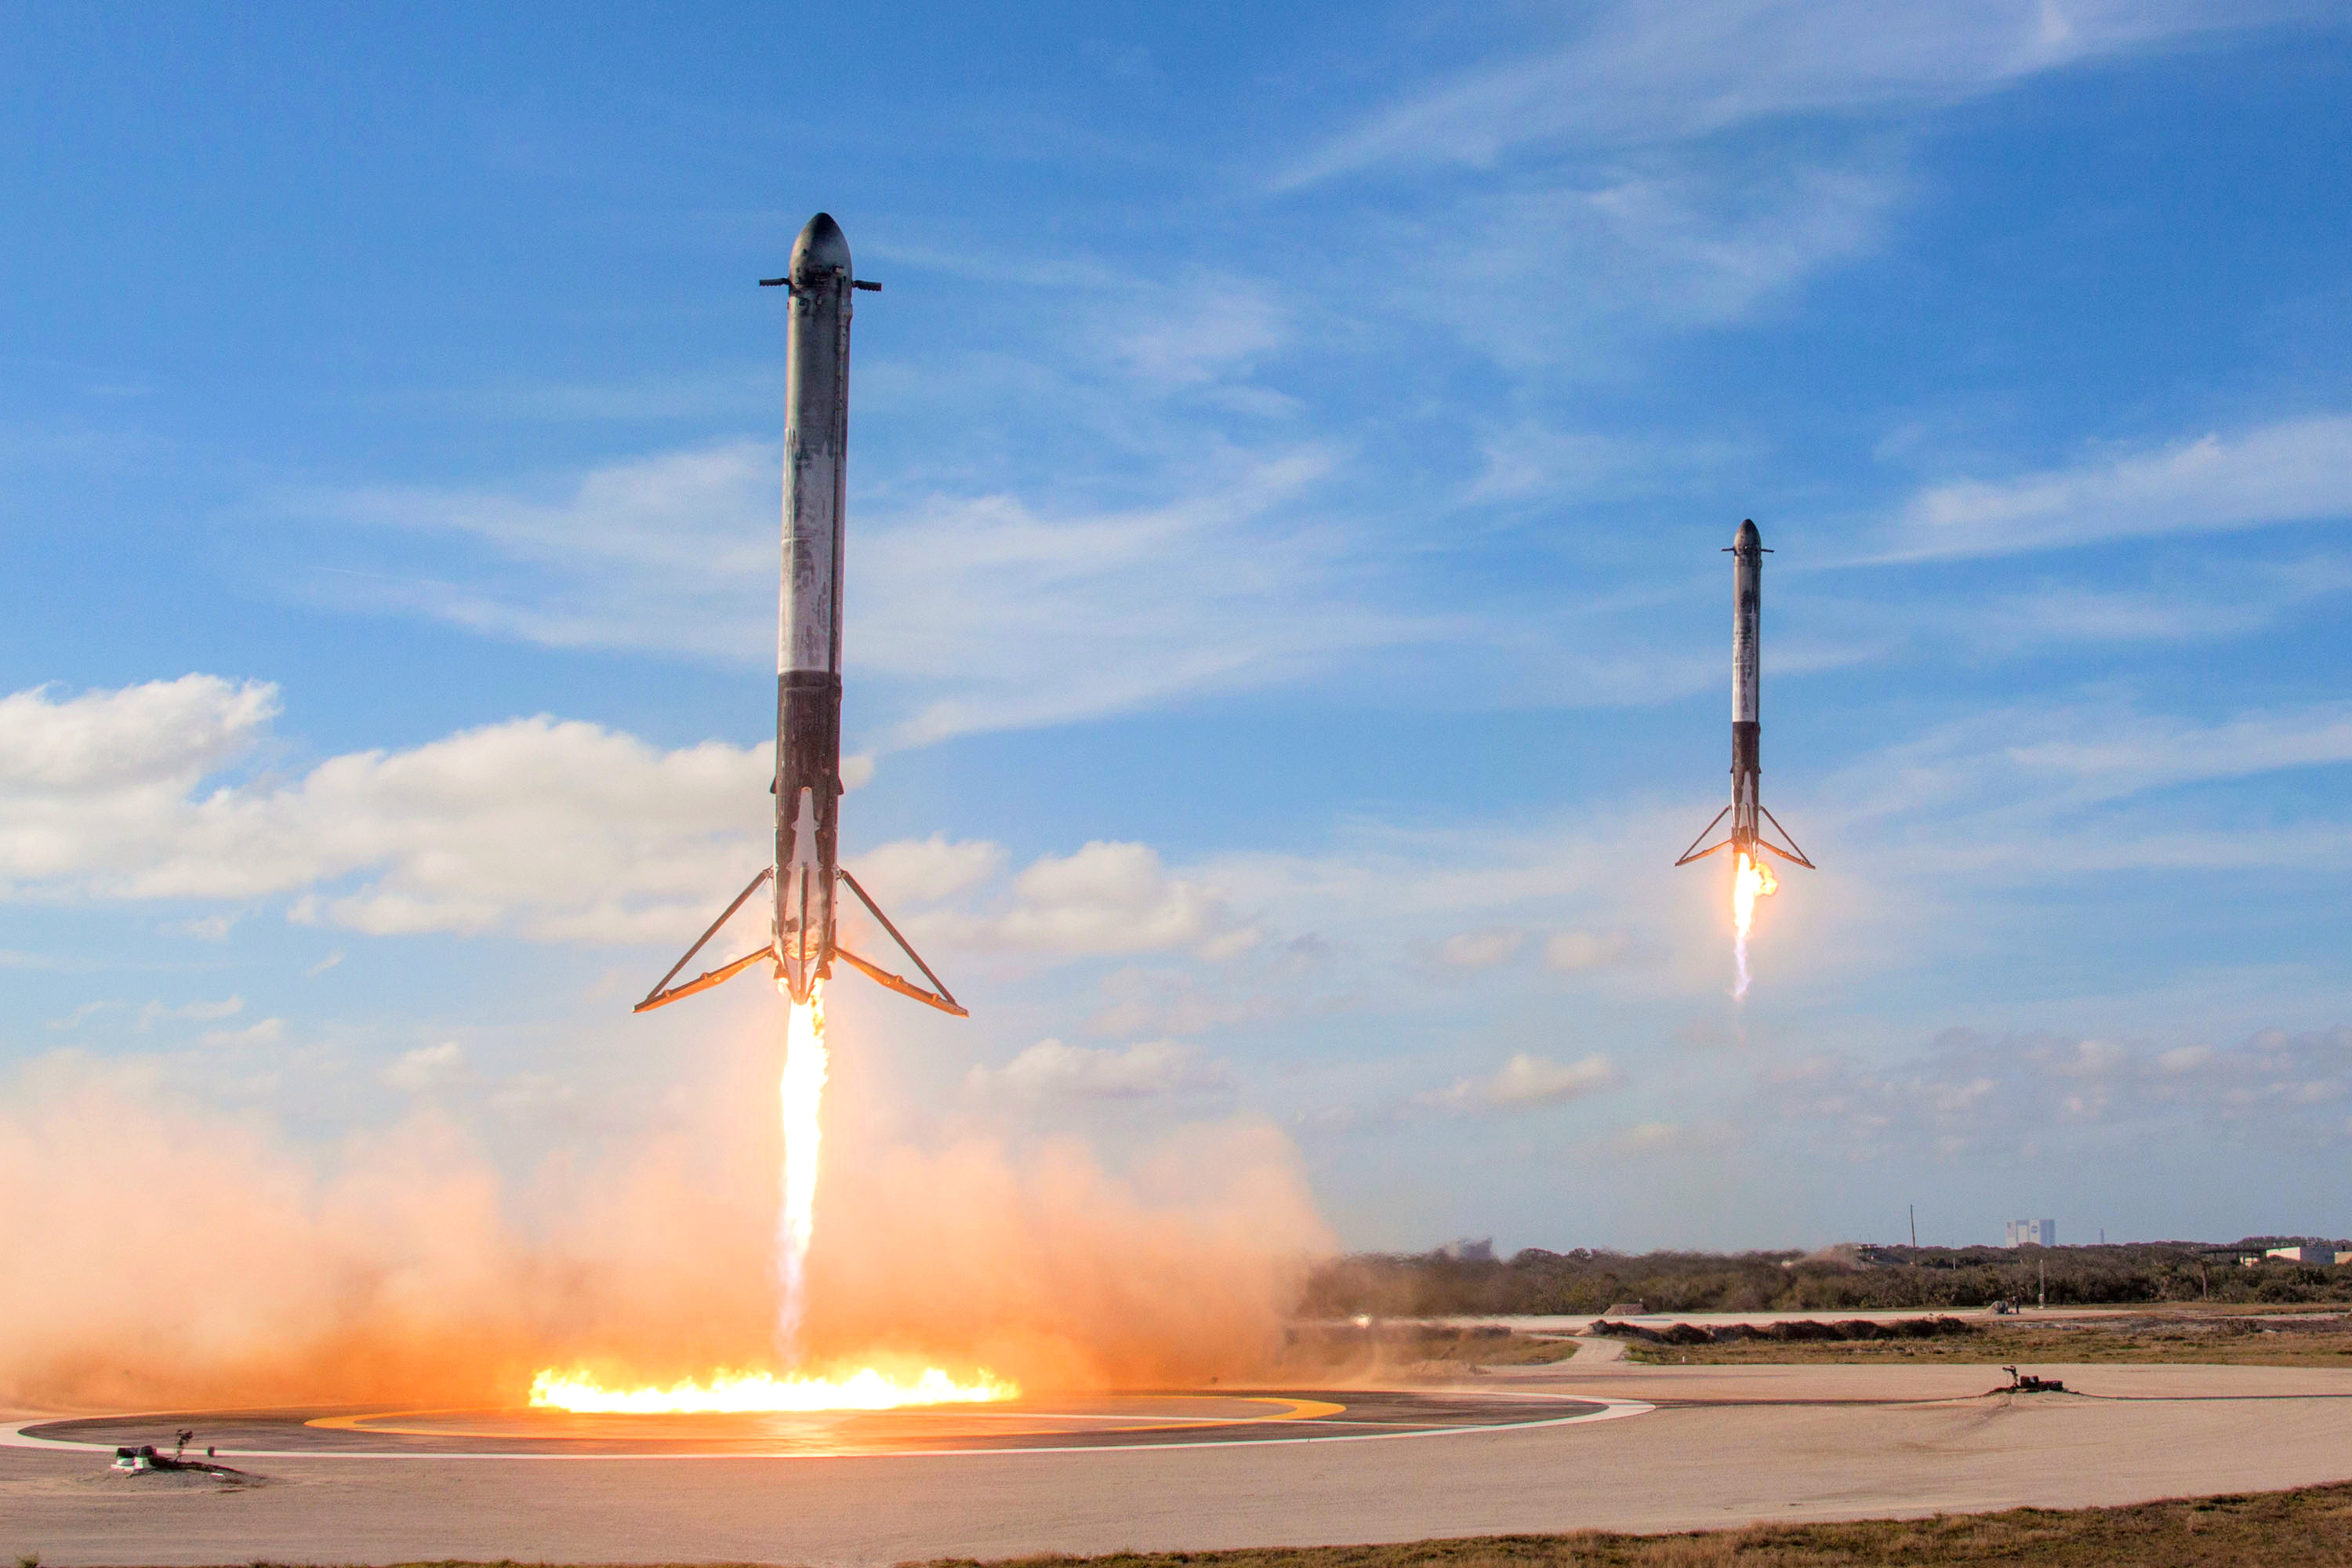 Two first stages of the Falcon Heavy landing simoultaneosly